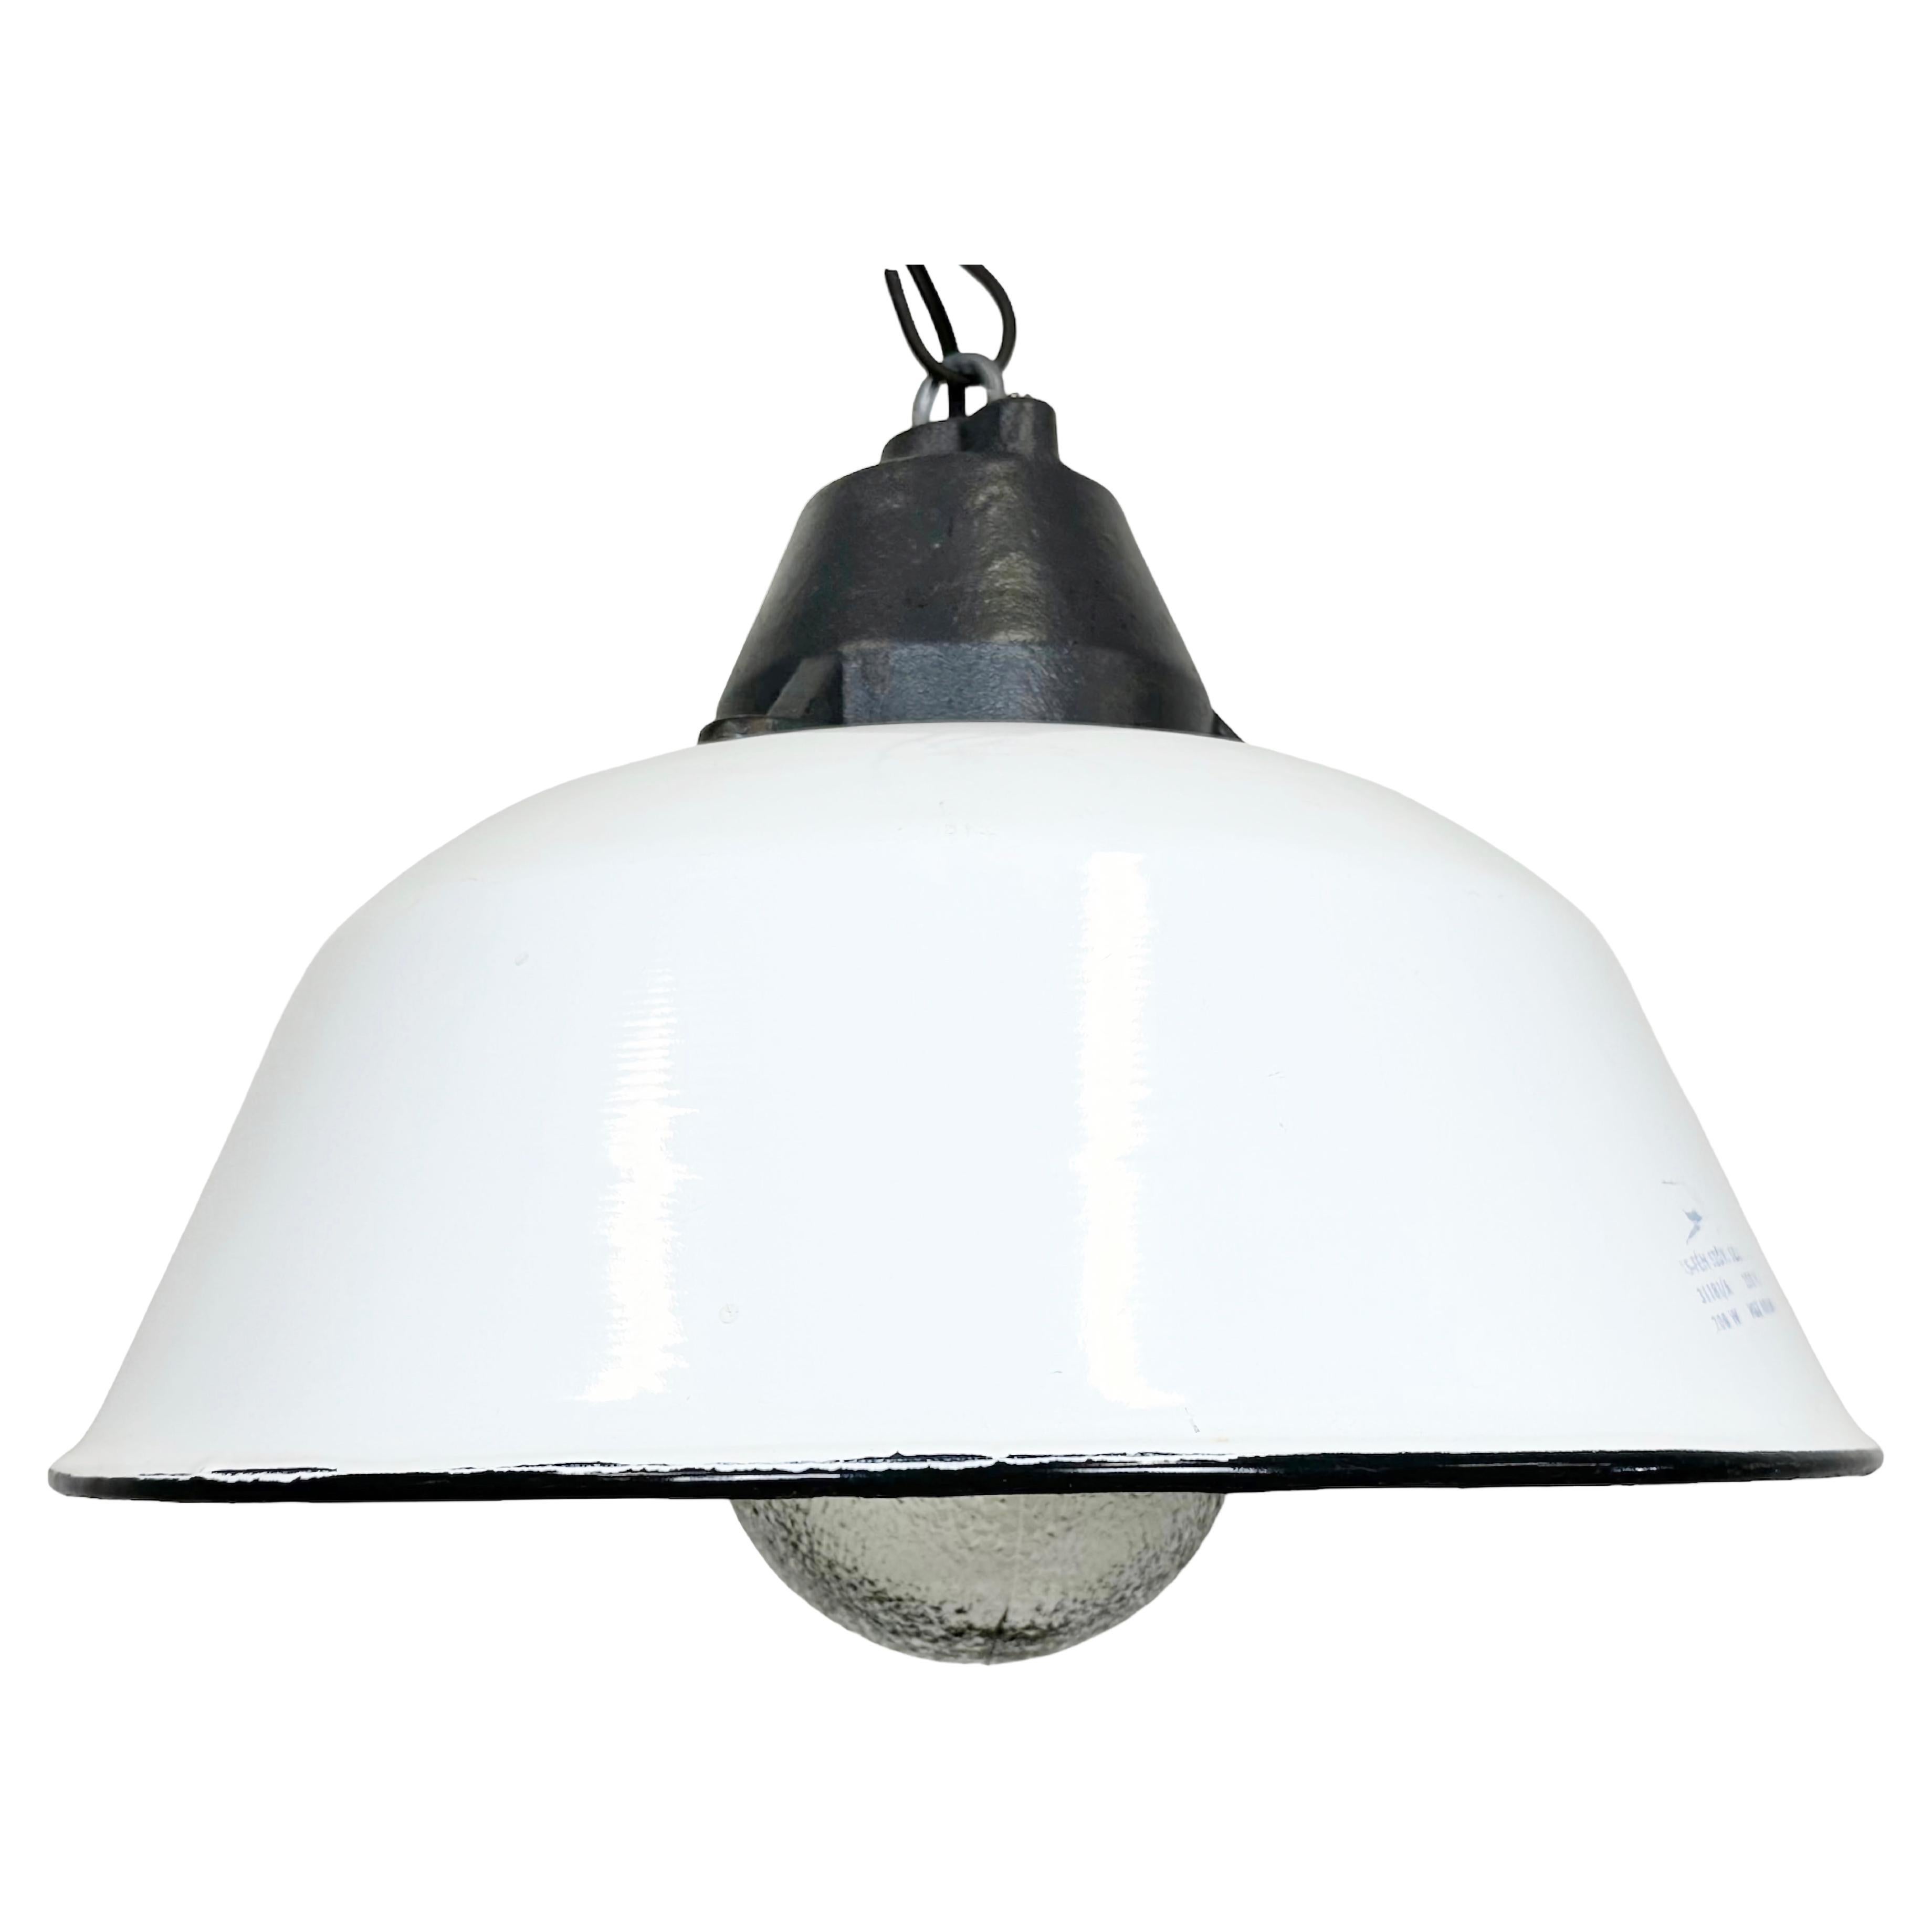 White Enamel and Cast Iron Industrial Pendant Light with Glass Cover, 1960s